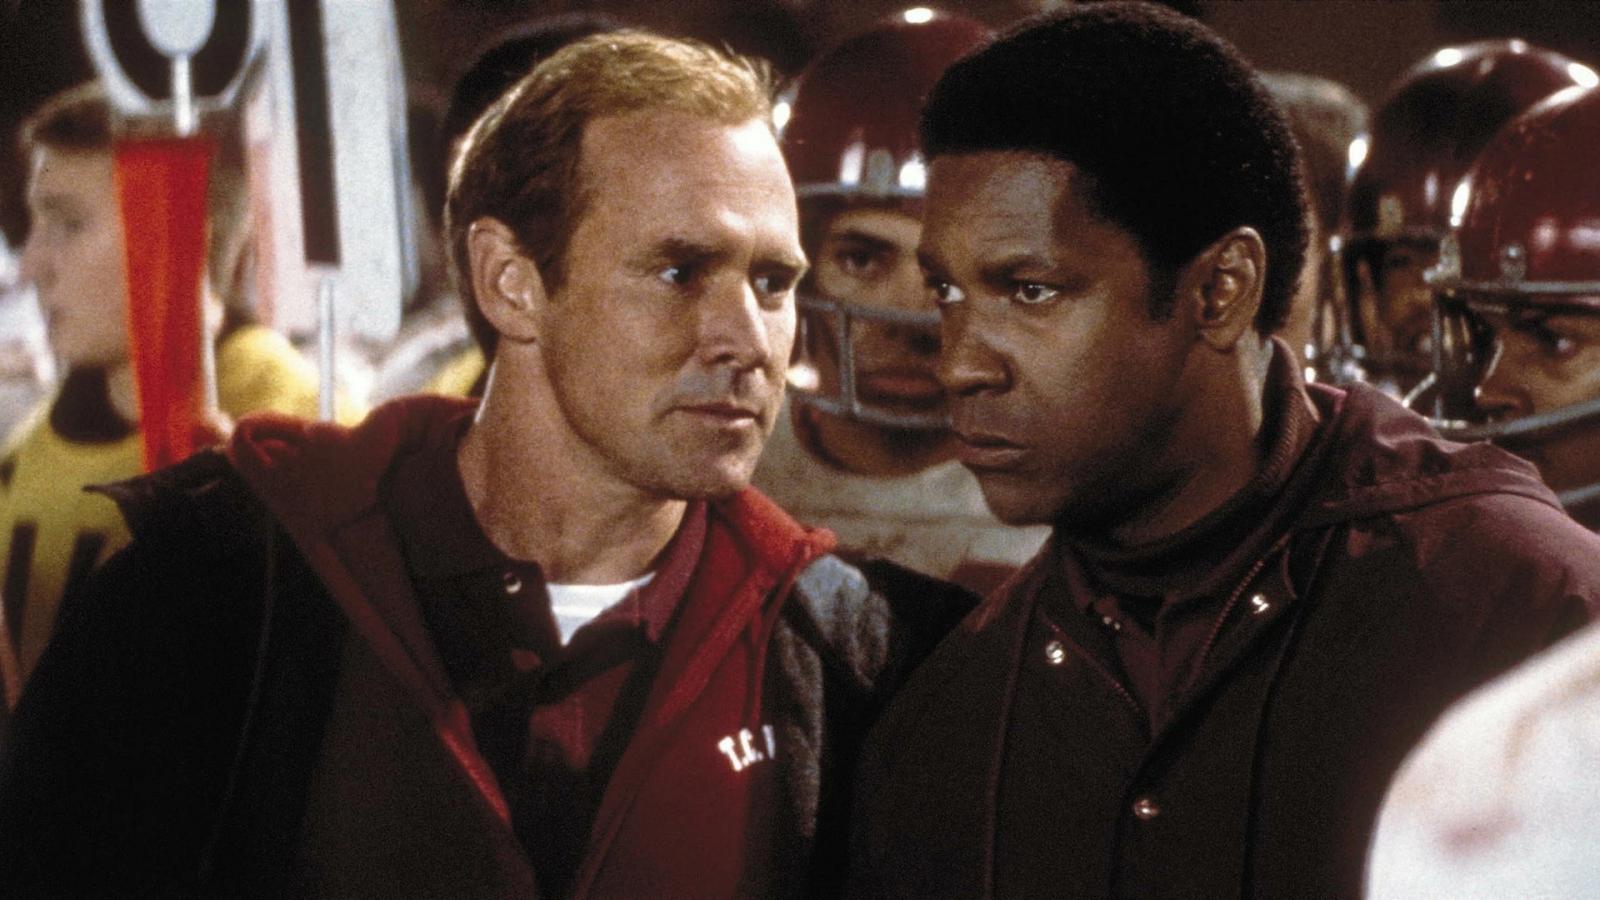 10 Sports Movies That Scored Big on and Off the Field - image 2